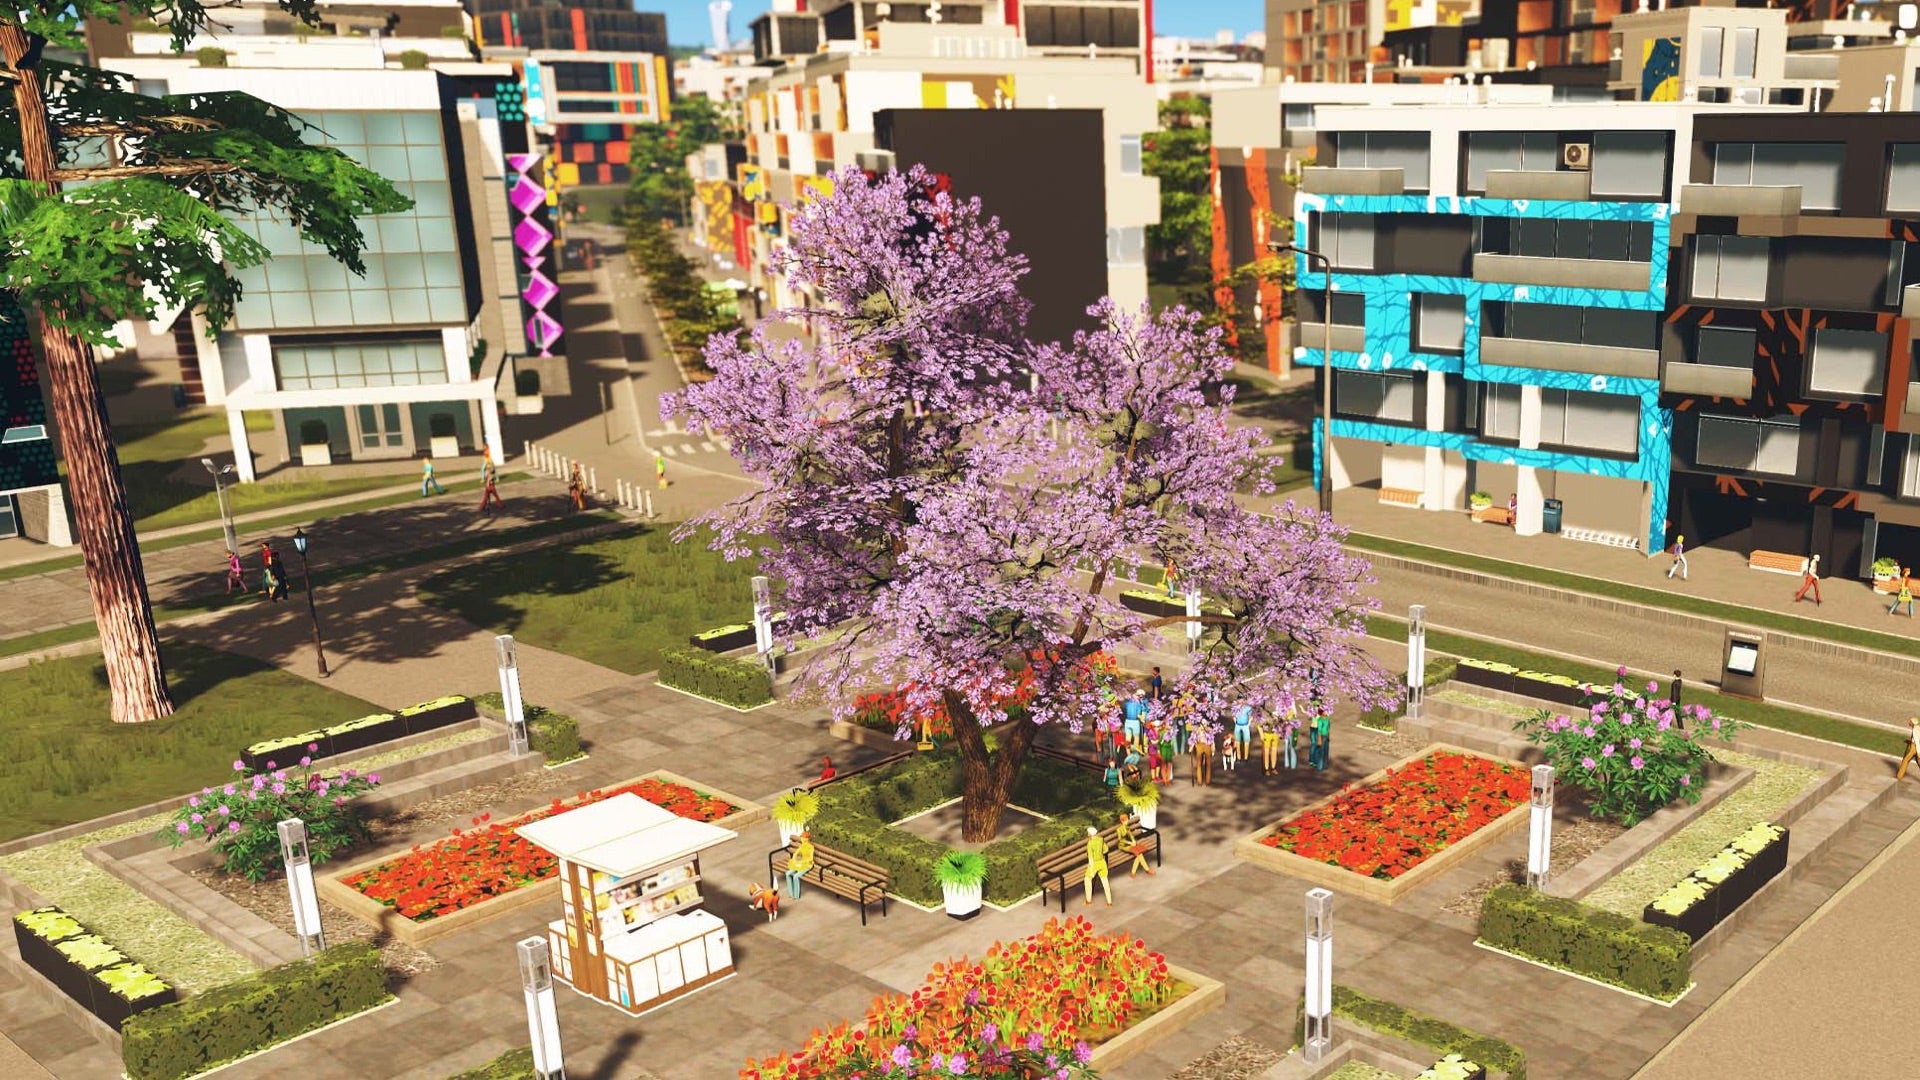 Image for Cities Skylines gets pedestrianisation in new Plazas and Promenades expansion